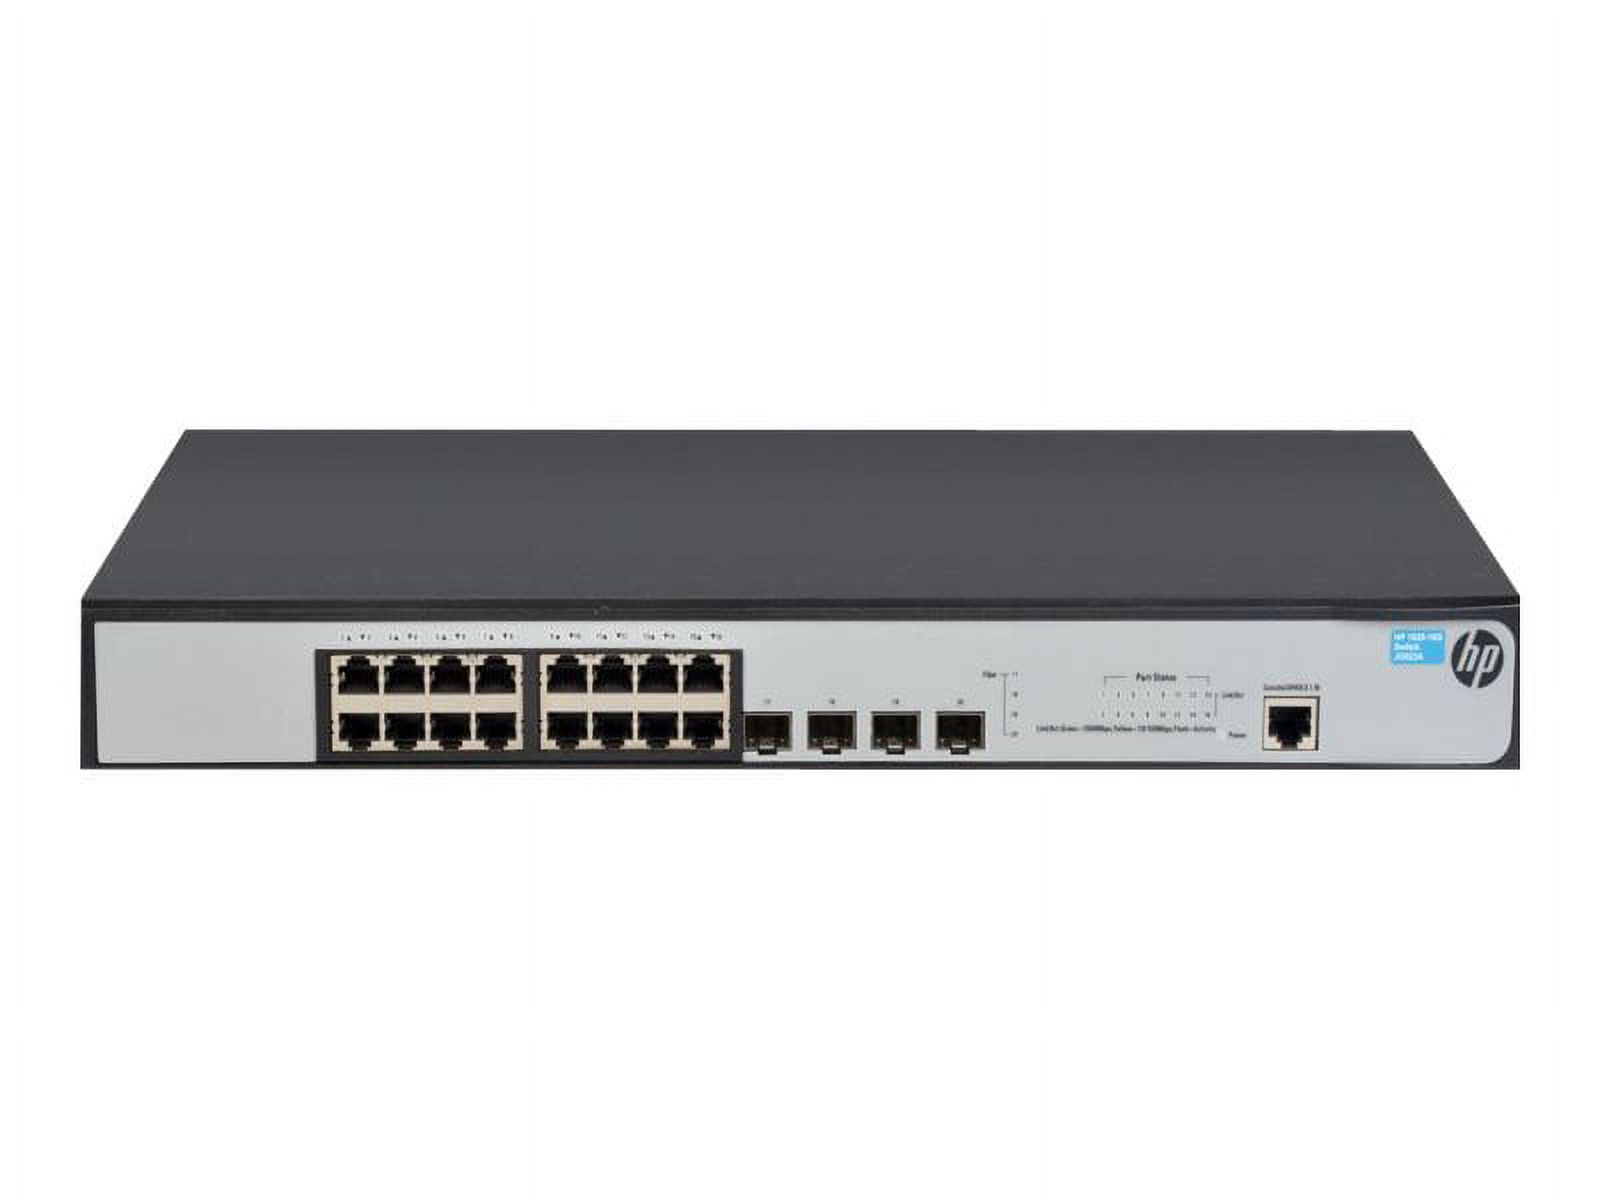 HPE Networking BTO - JG923A#ABA - HP 1920-16G Switch - image 2 of 6